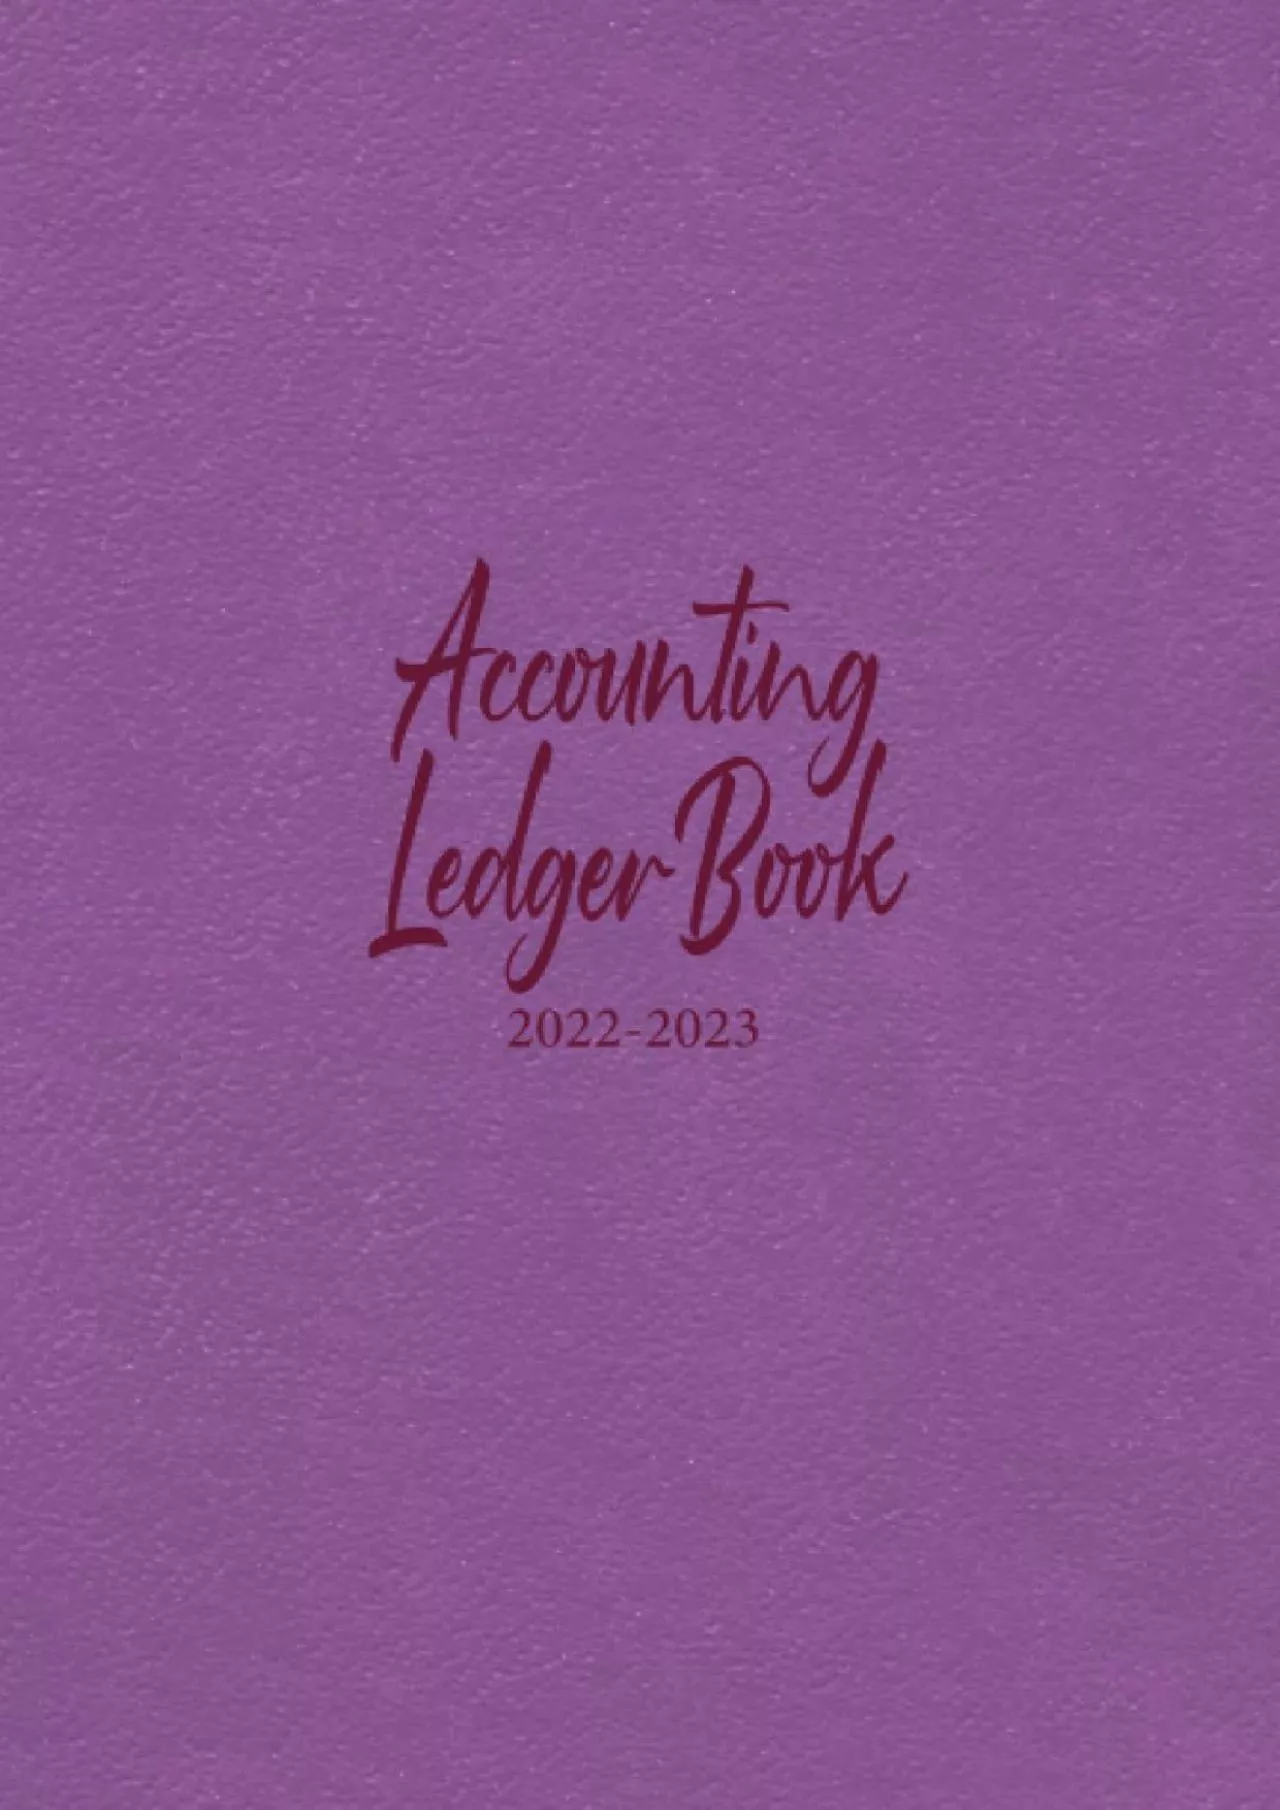 Accounting Ledger Book 2022-2023: Simple Accounting Ledger Book for Bookkeeping and Small